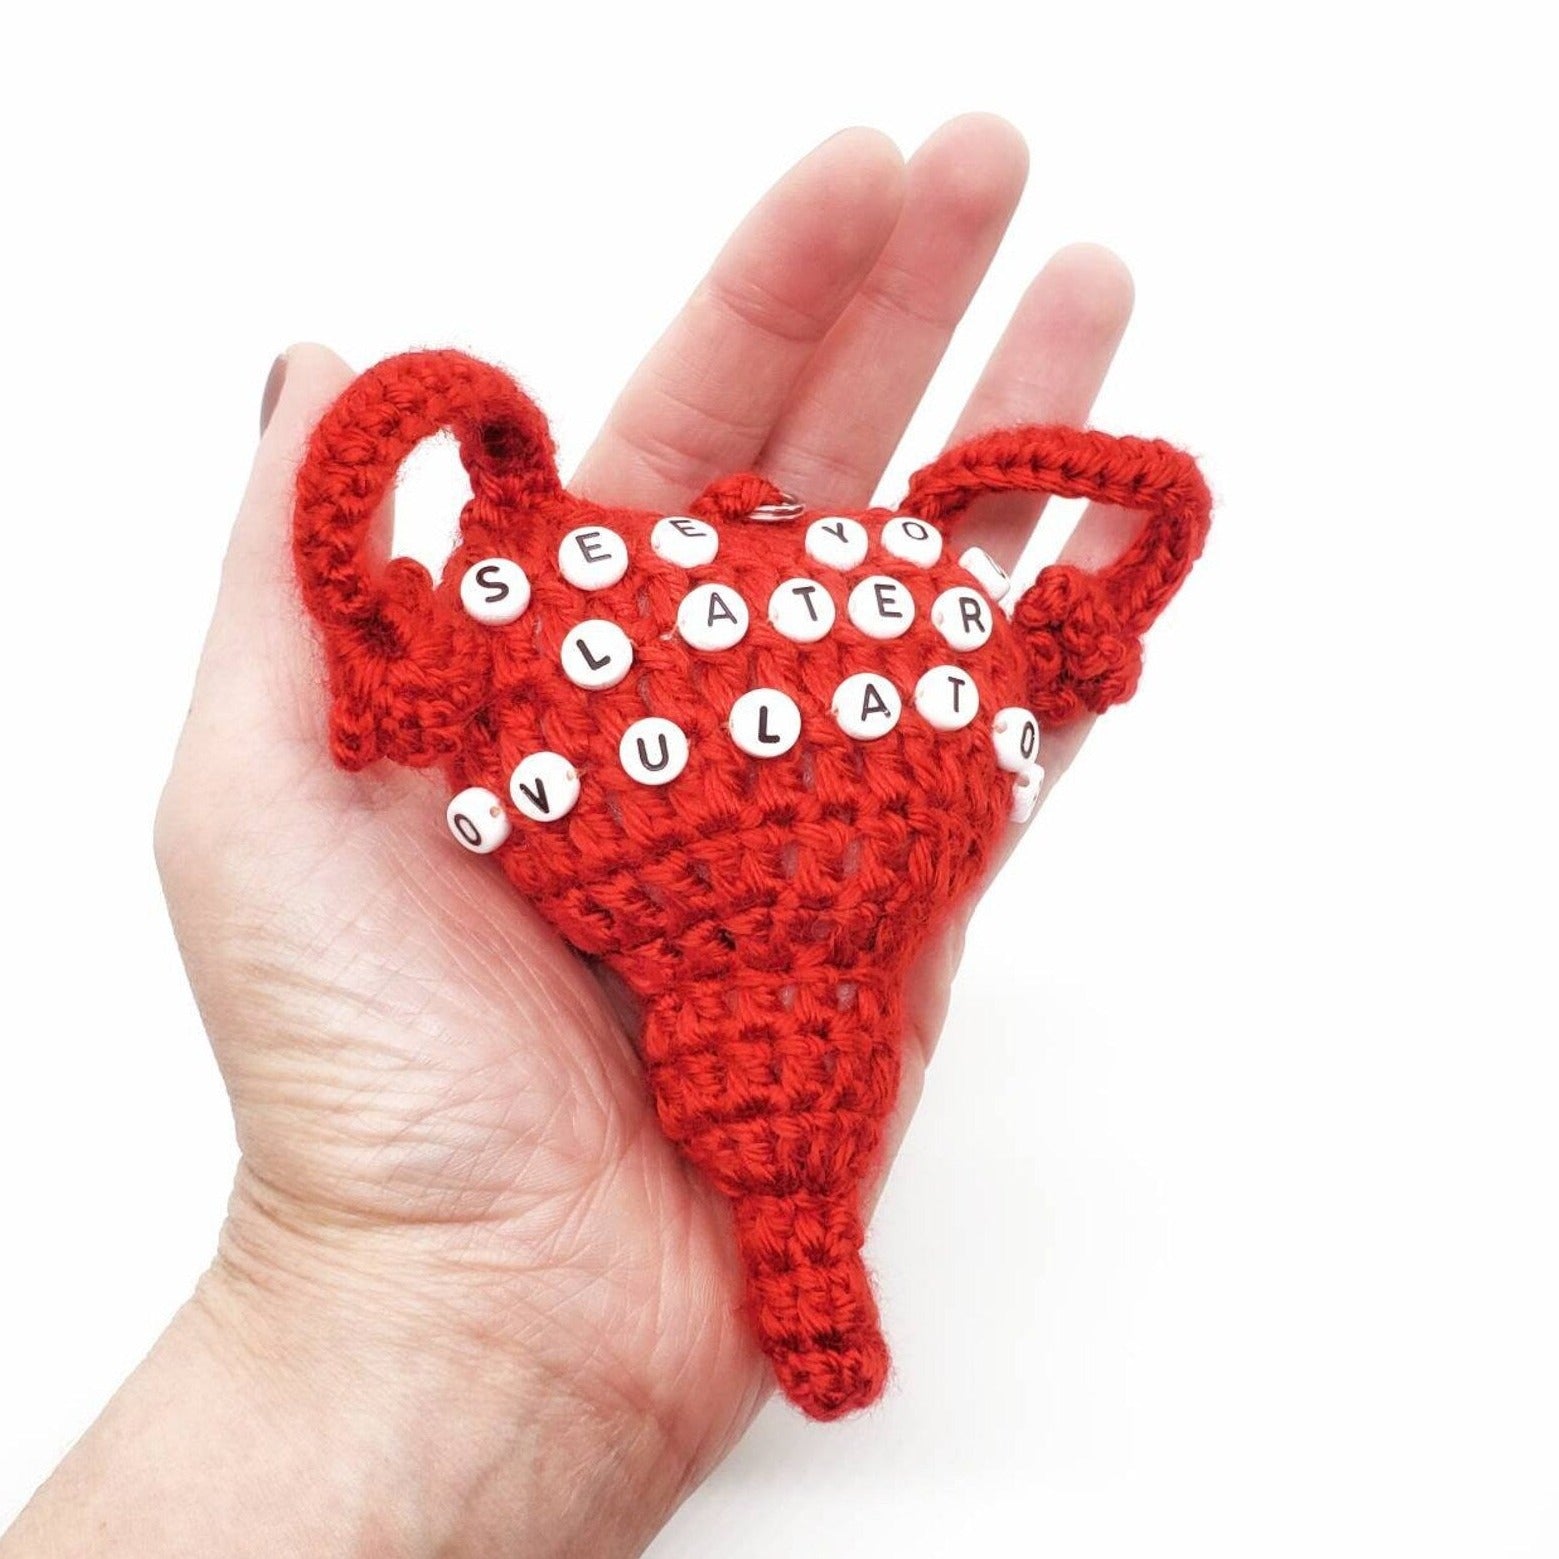 The palm of a hand holding a red acrylic yarn crocheted into the shape of a uterus with See You Later Ovulator spelled out in black and white beads.